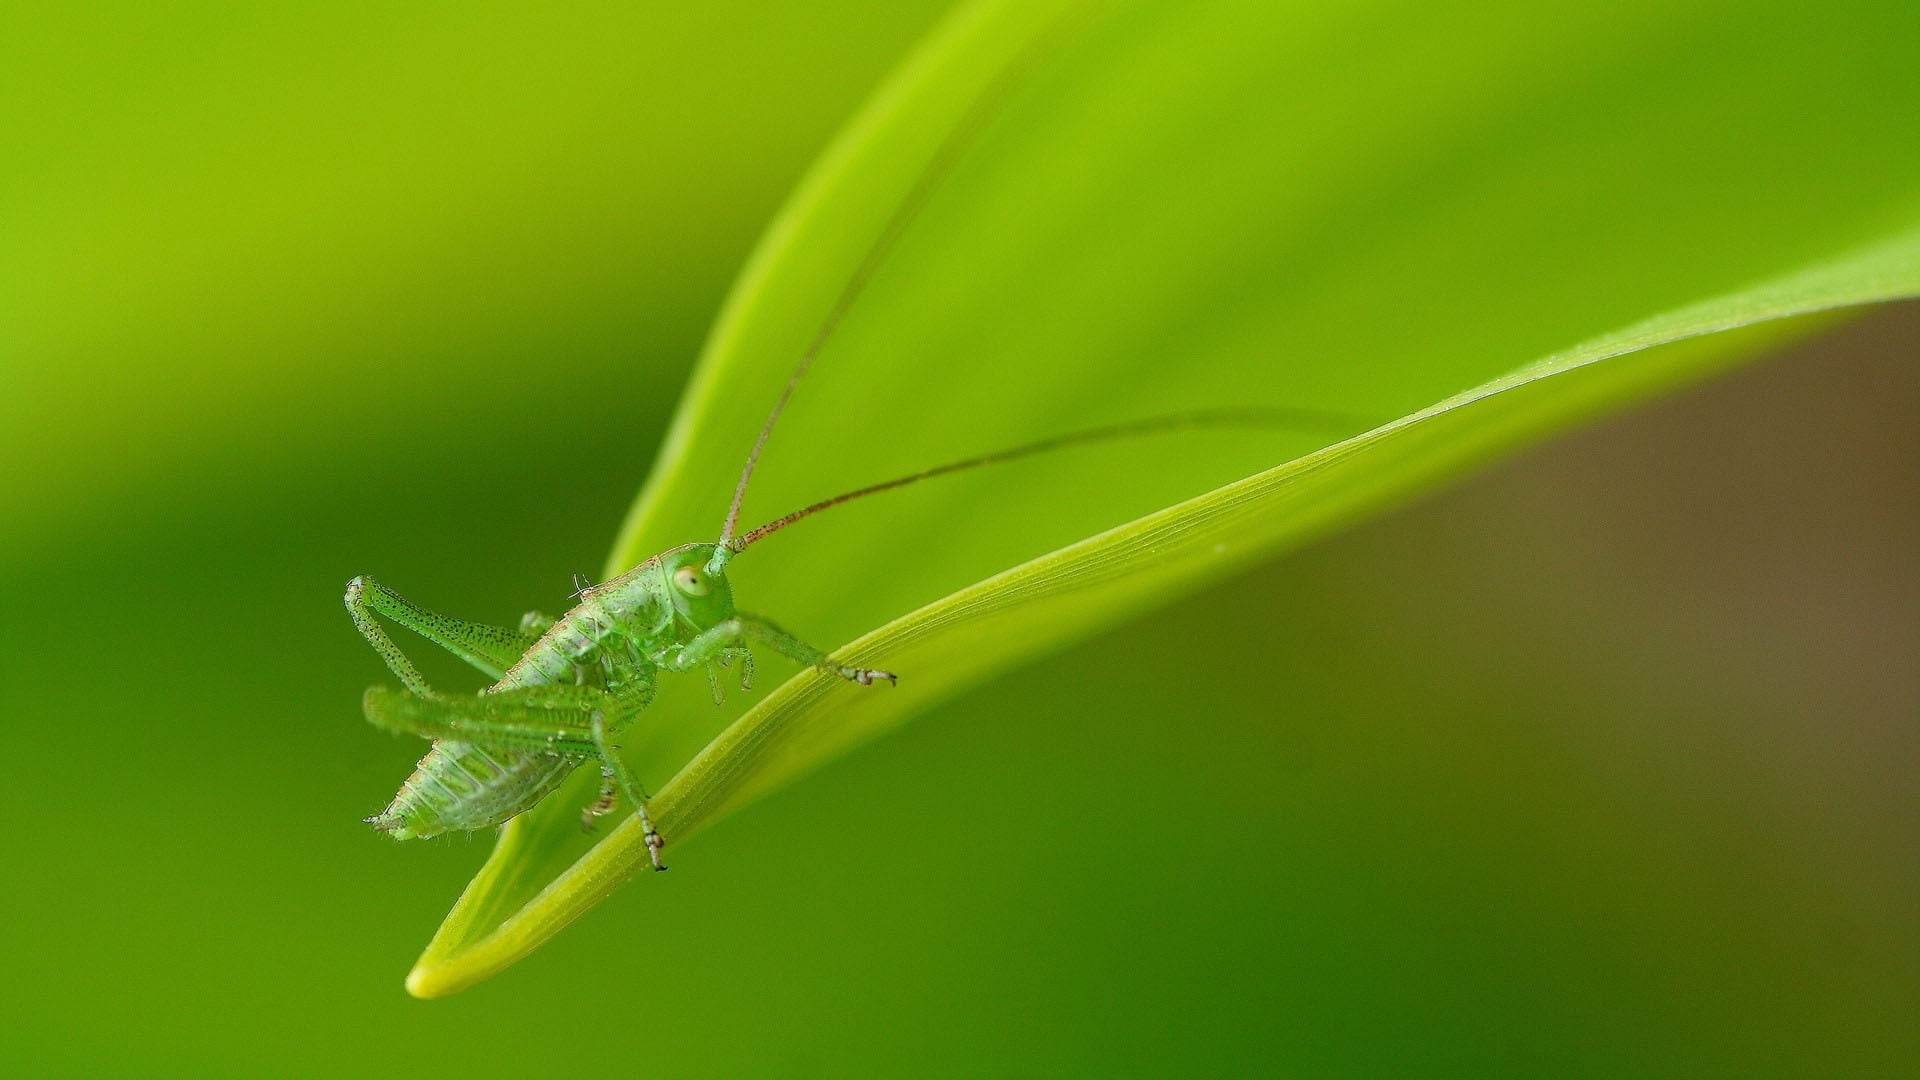 green grasshopper on selective focus photo, insect, macro, plants